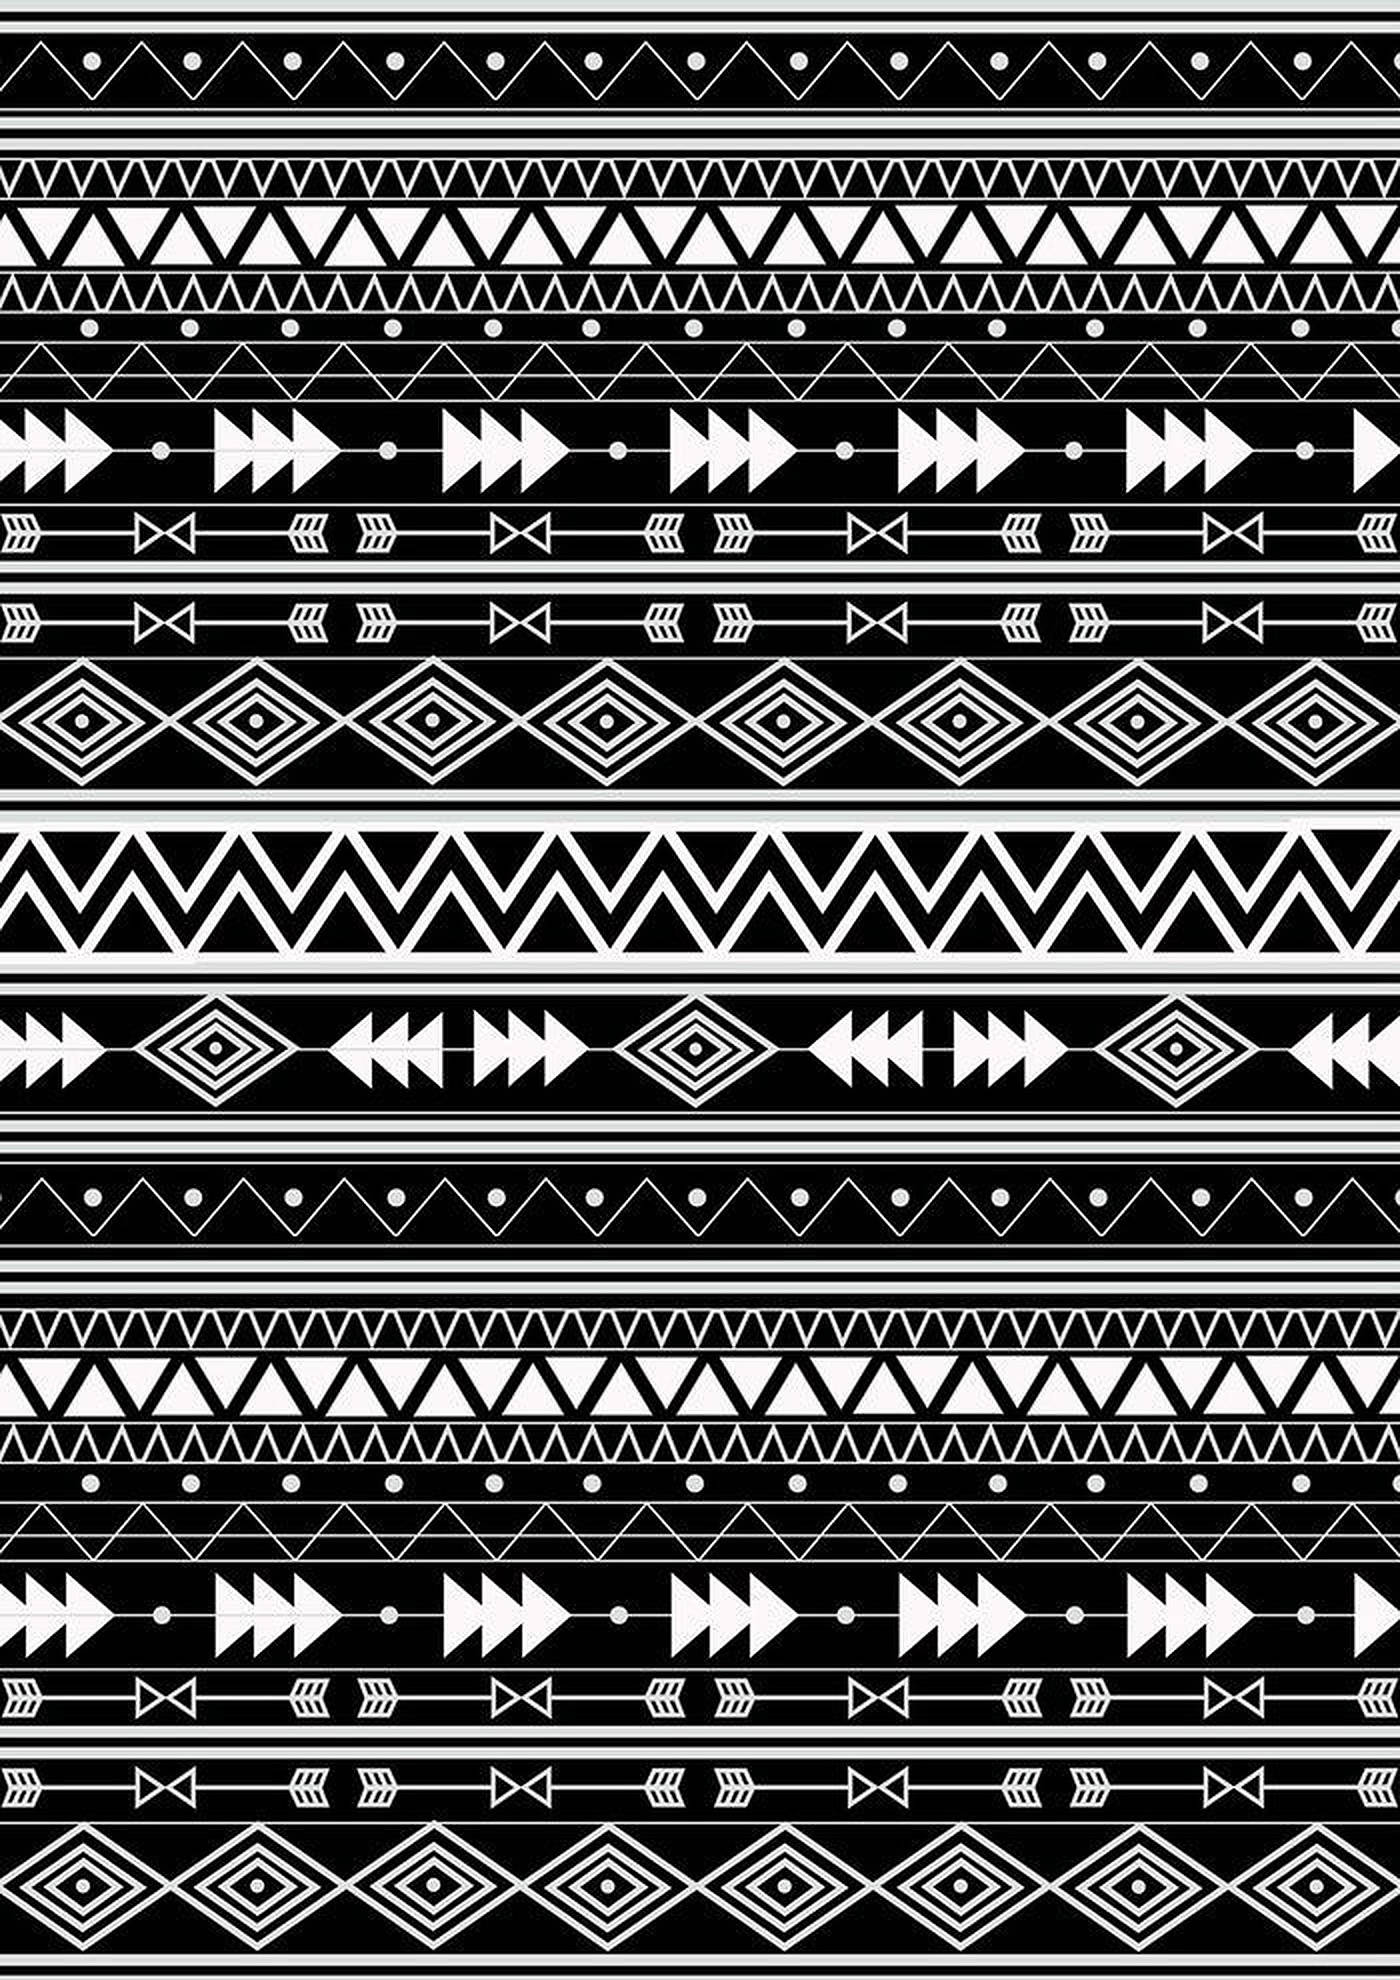 Download Black And White Tribal Pattern Wallpaper | Wallpapers.com